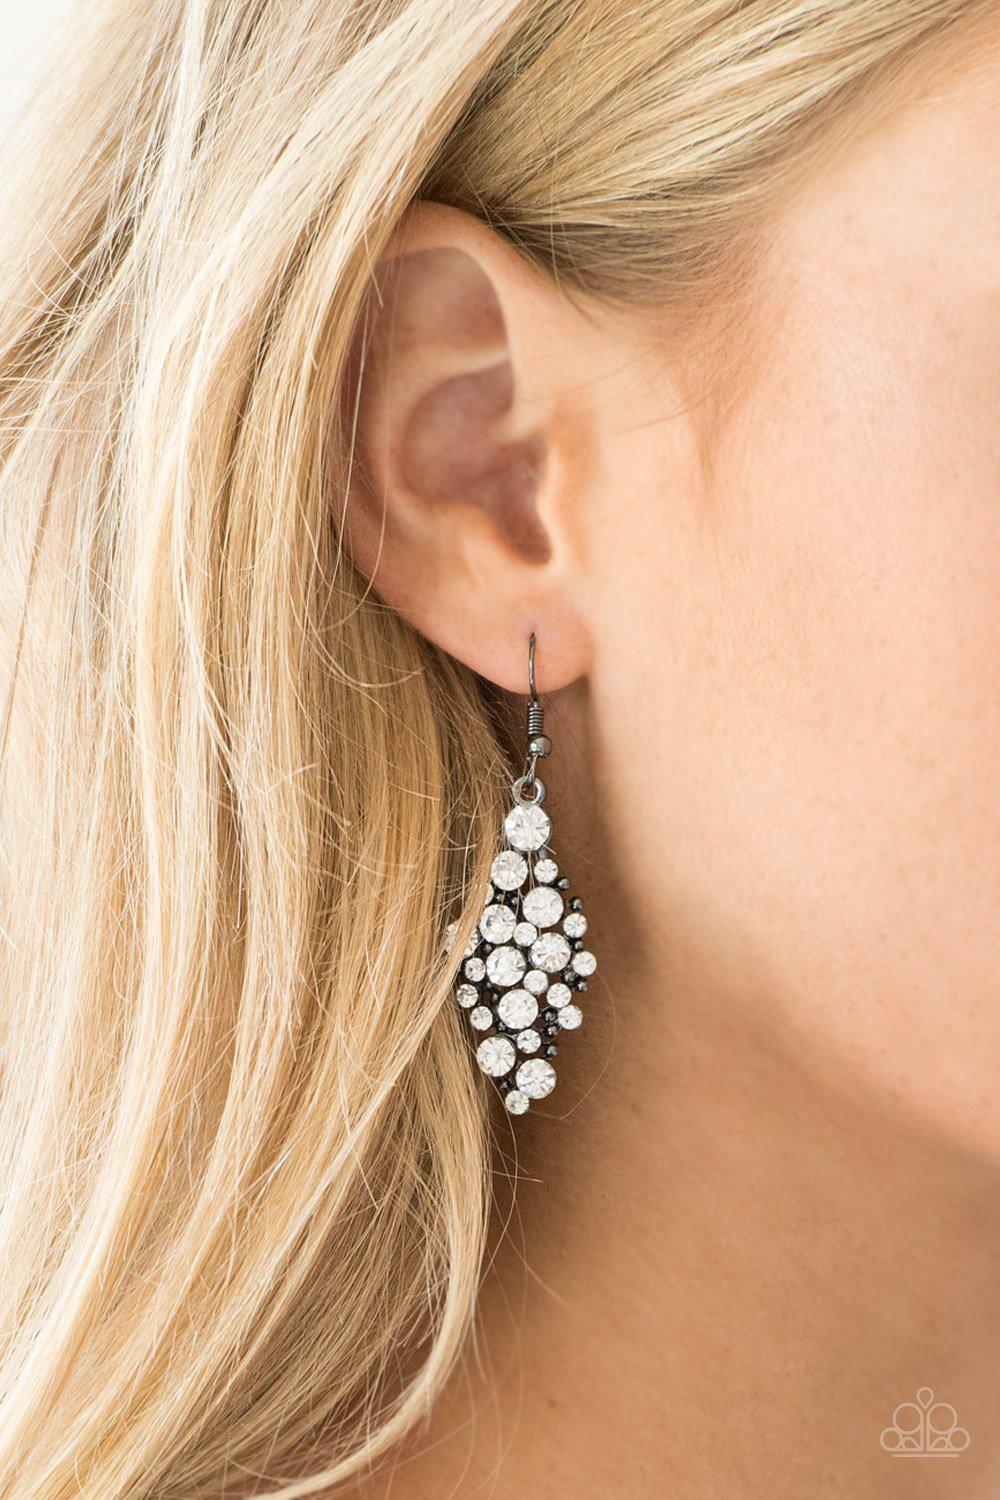 Cosmically Chic Black and White Rhinestone Earrings - Paparazzi Accessories-CarasShop.com - $5 Jewelry by Cara Jewels